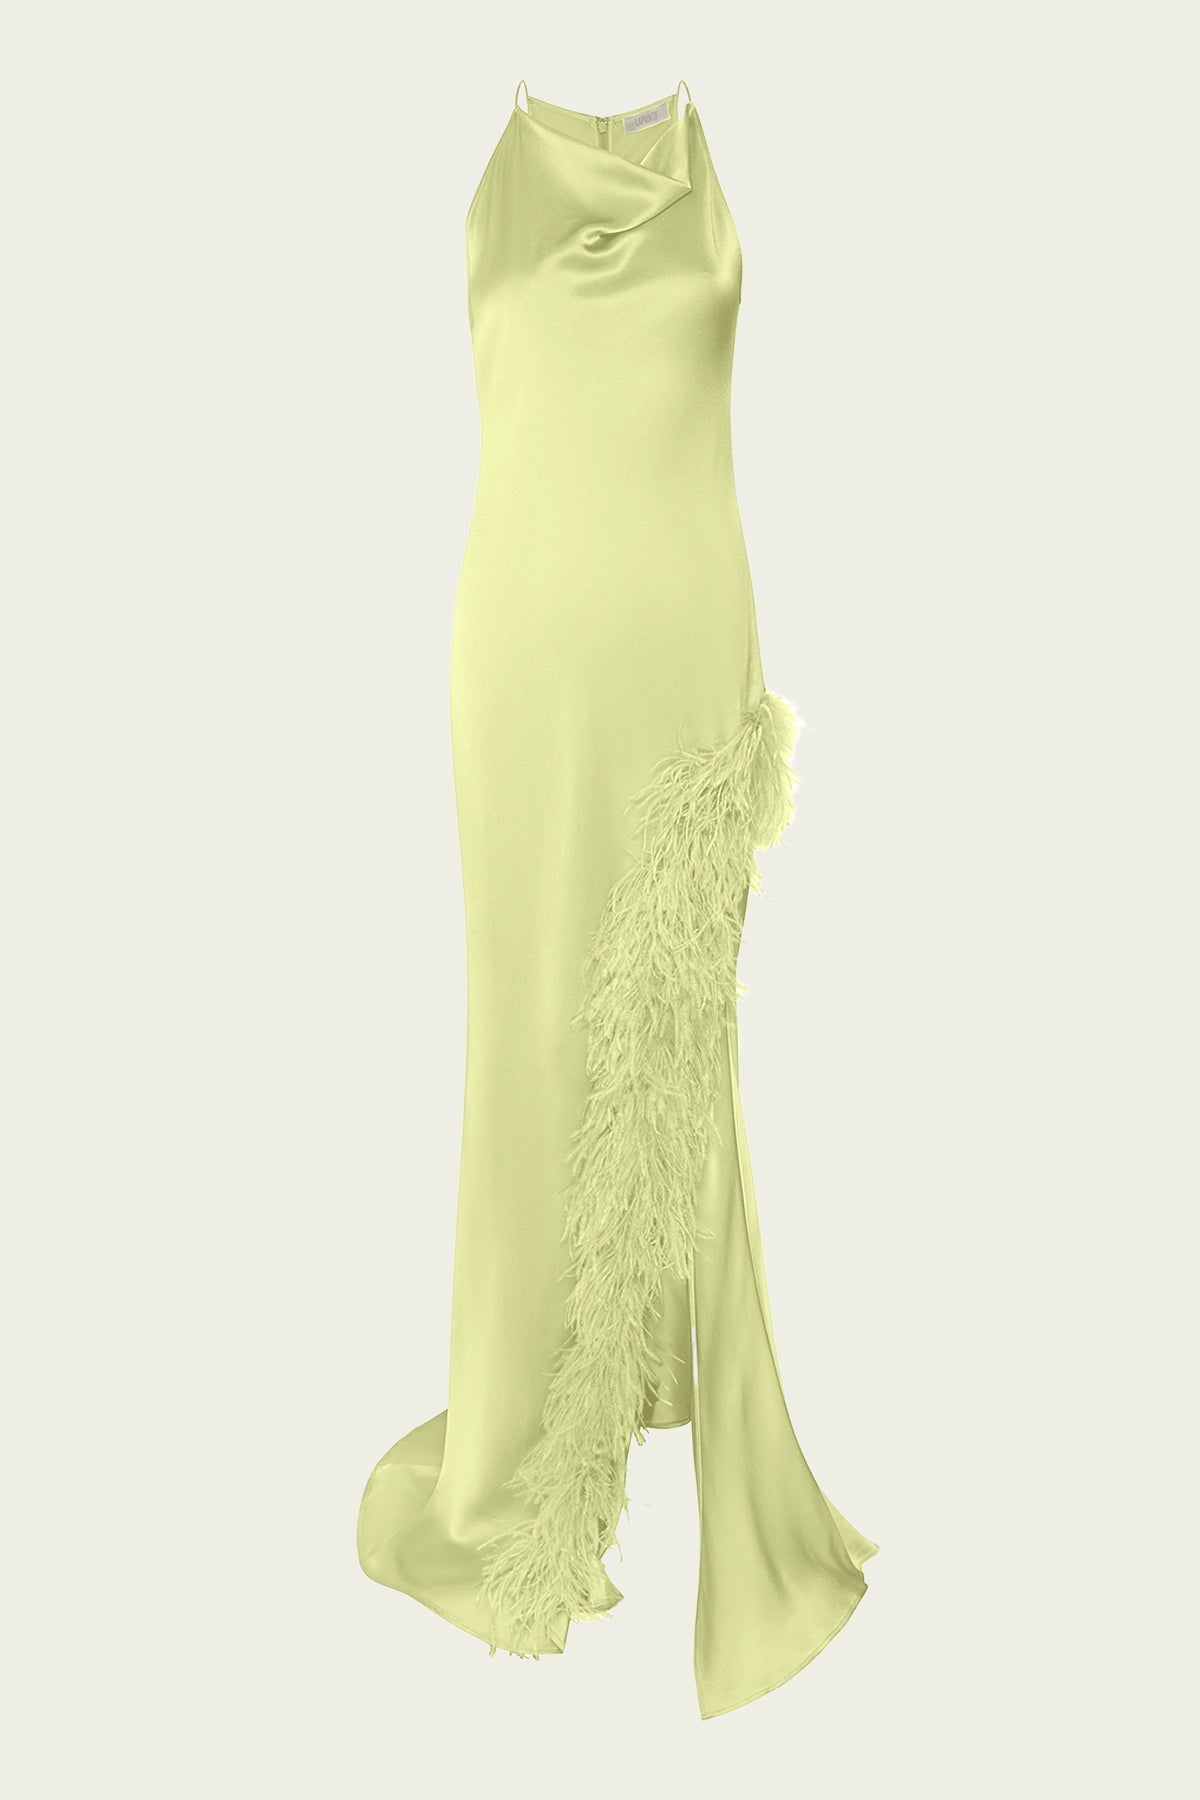 Satin Halter Gown with Feathers in Limon - shop-olivia.com